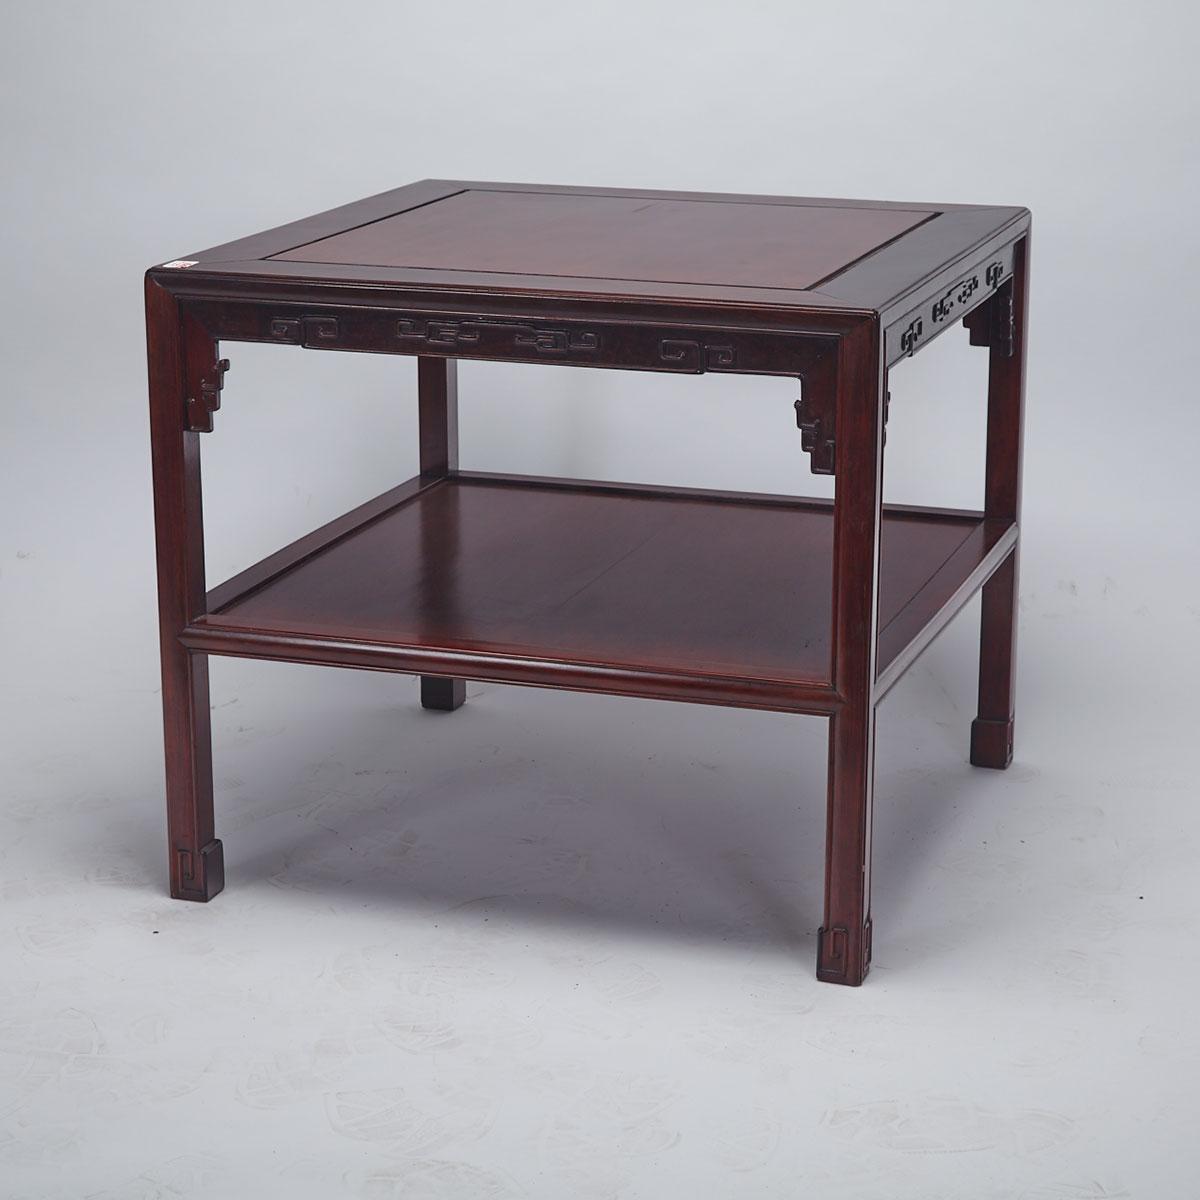 Low Square-Form Rosewood Table